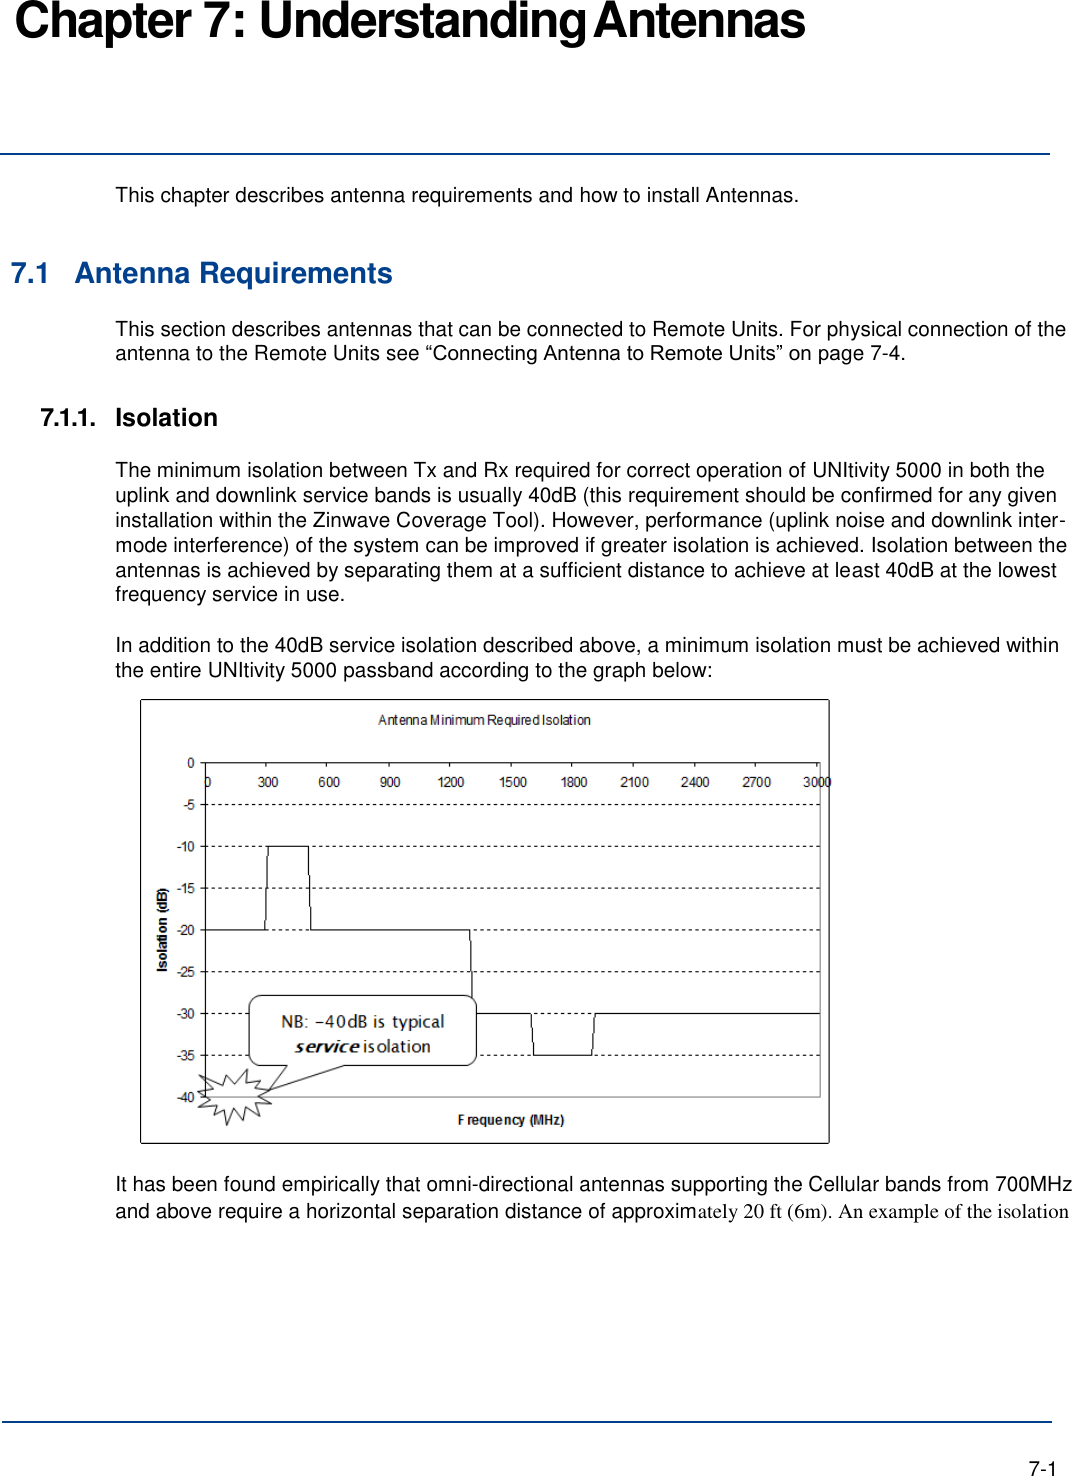 Chapter 7: Understanding Antennas     This chapter describes antenna requirements and how to install Antennas.   7.1 Antenna Requirements This section describes antennas that can be connected to Remote Units. For physical connection of the antenna to the Remote Units see “Connecting Antenna to Remote Units” on page 7-4.  7.1.1.  Isolation  The minimum isolation between Tx and Rx required for correct operation of UNItivity 5000 in both the uplink and downlink service bands is usually 40dB (this requirement should be confirmed for any given installation within the Zinwave Coverage Tool). However, performance (uplink noise and downlink inter- mode interference) of the system can be improved if greater isolation is achieved. Isolation between the antennas is achieved by separating them at a sufficient distance to achieve at least 40dB at the lowest frequency service in use.  In addition to the 40dB service isolation described above, a minimum isolation must be achieved within the entire UNItivity 5000 passband according to the graph below:   It has been found empirically that omni-directional antennas supporting the Cellular bands from 700MHz and above require a horizontal separation distance of approximately 20 ft (6m). An example of the isolation          7-1 